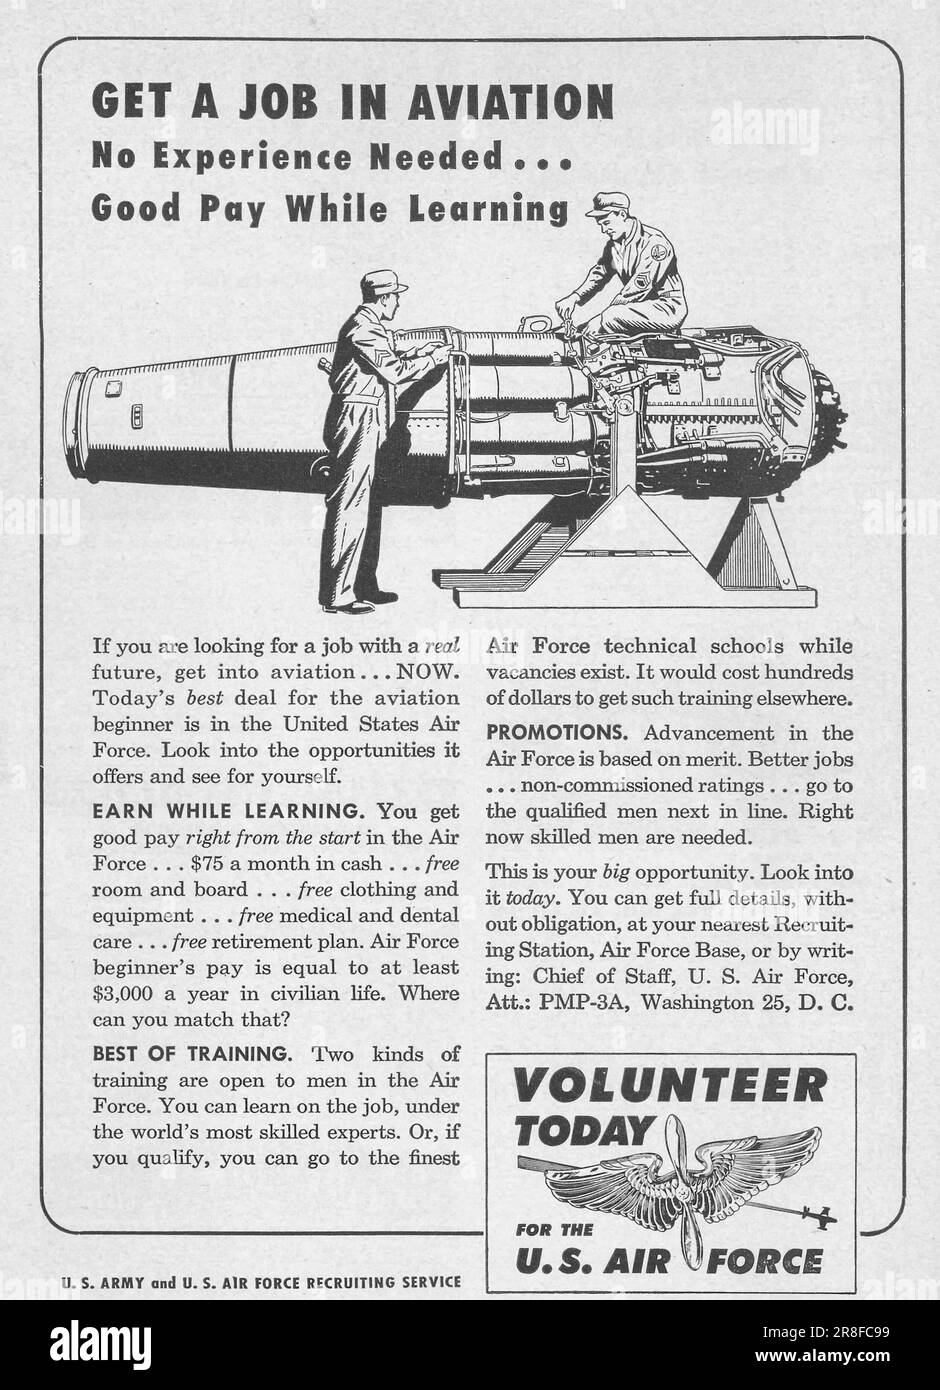 Volunteer today for the U.S. Air force - get a job in a vaiation advertisement in a magazine 1949 Stock Photo